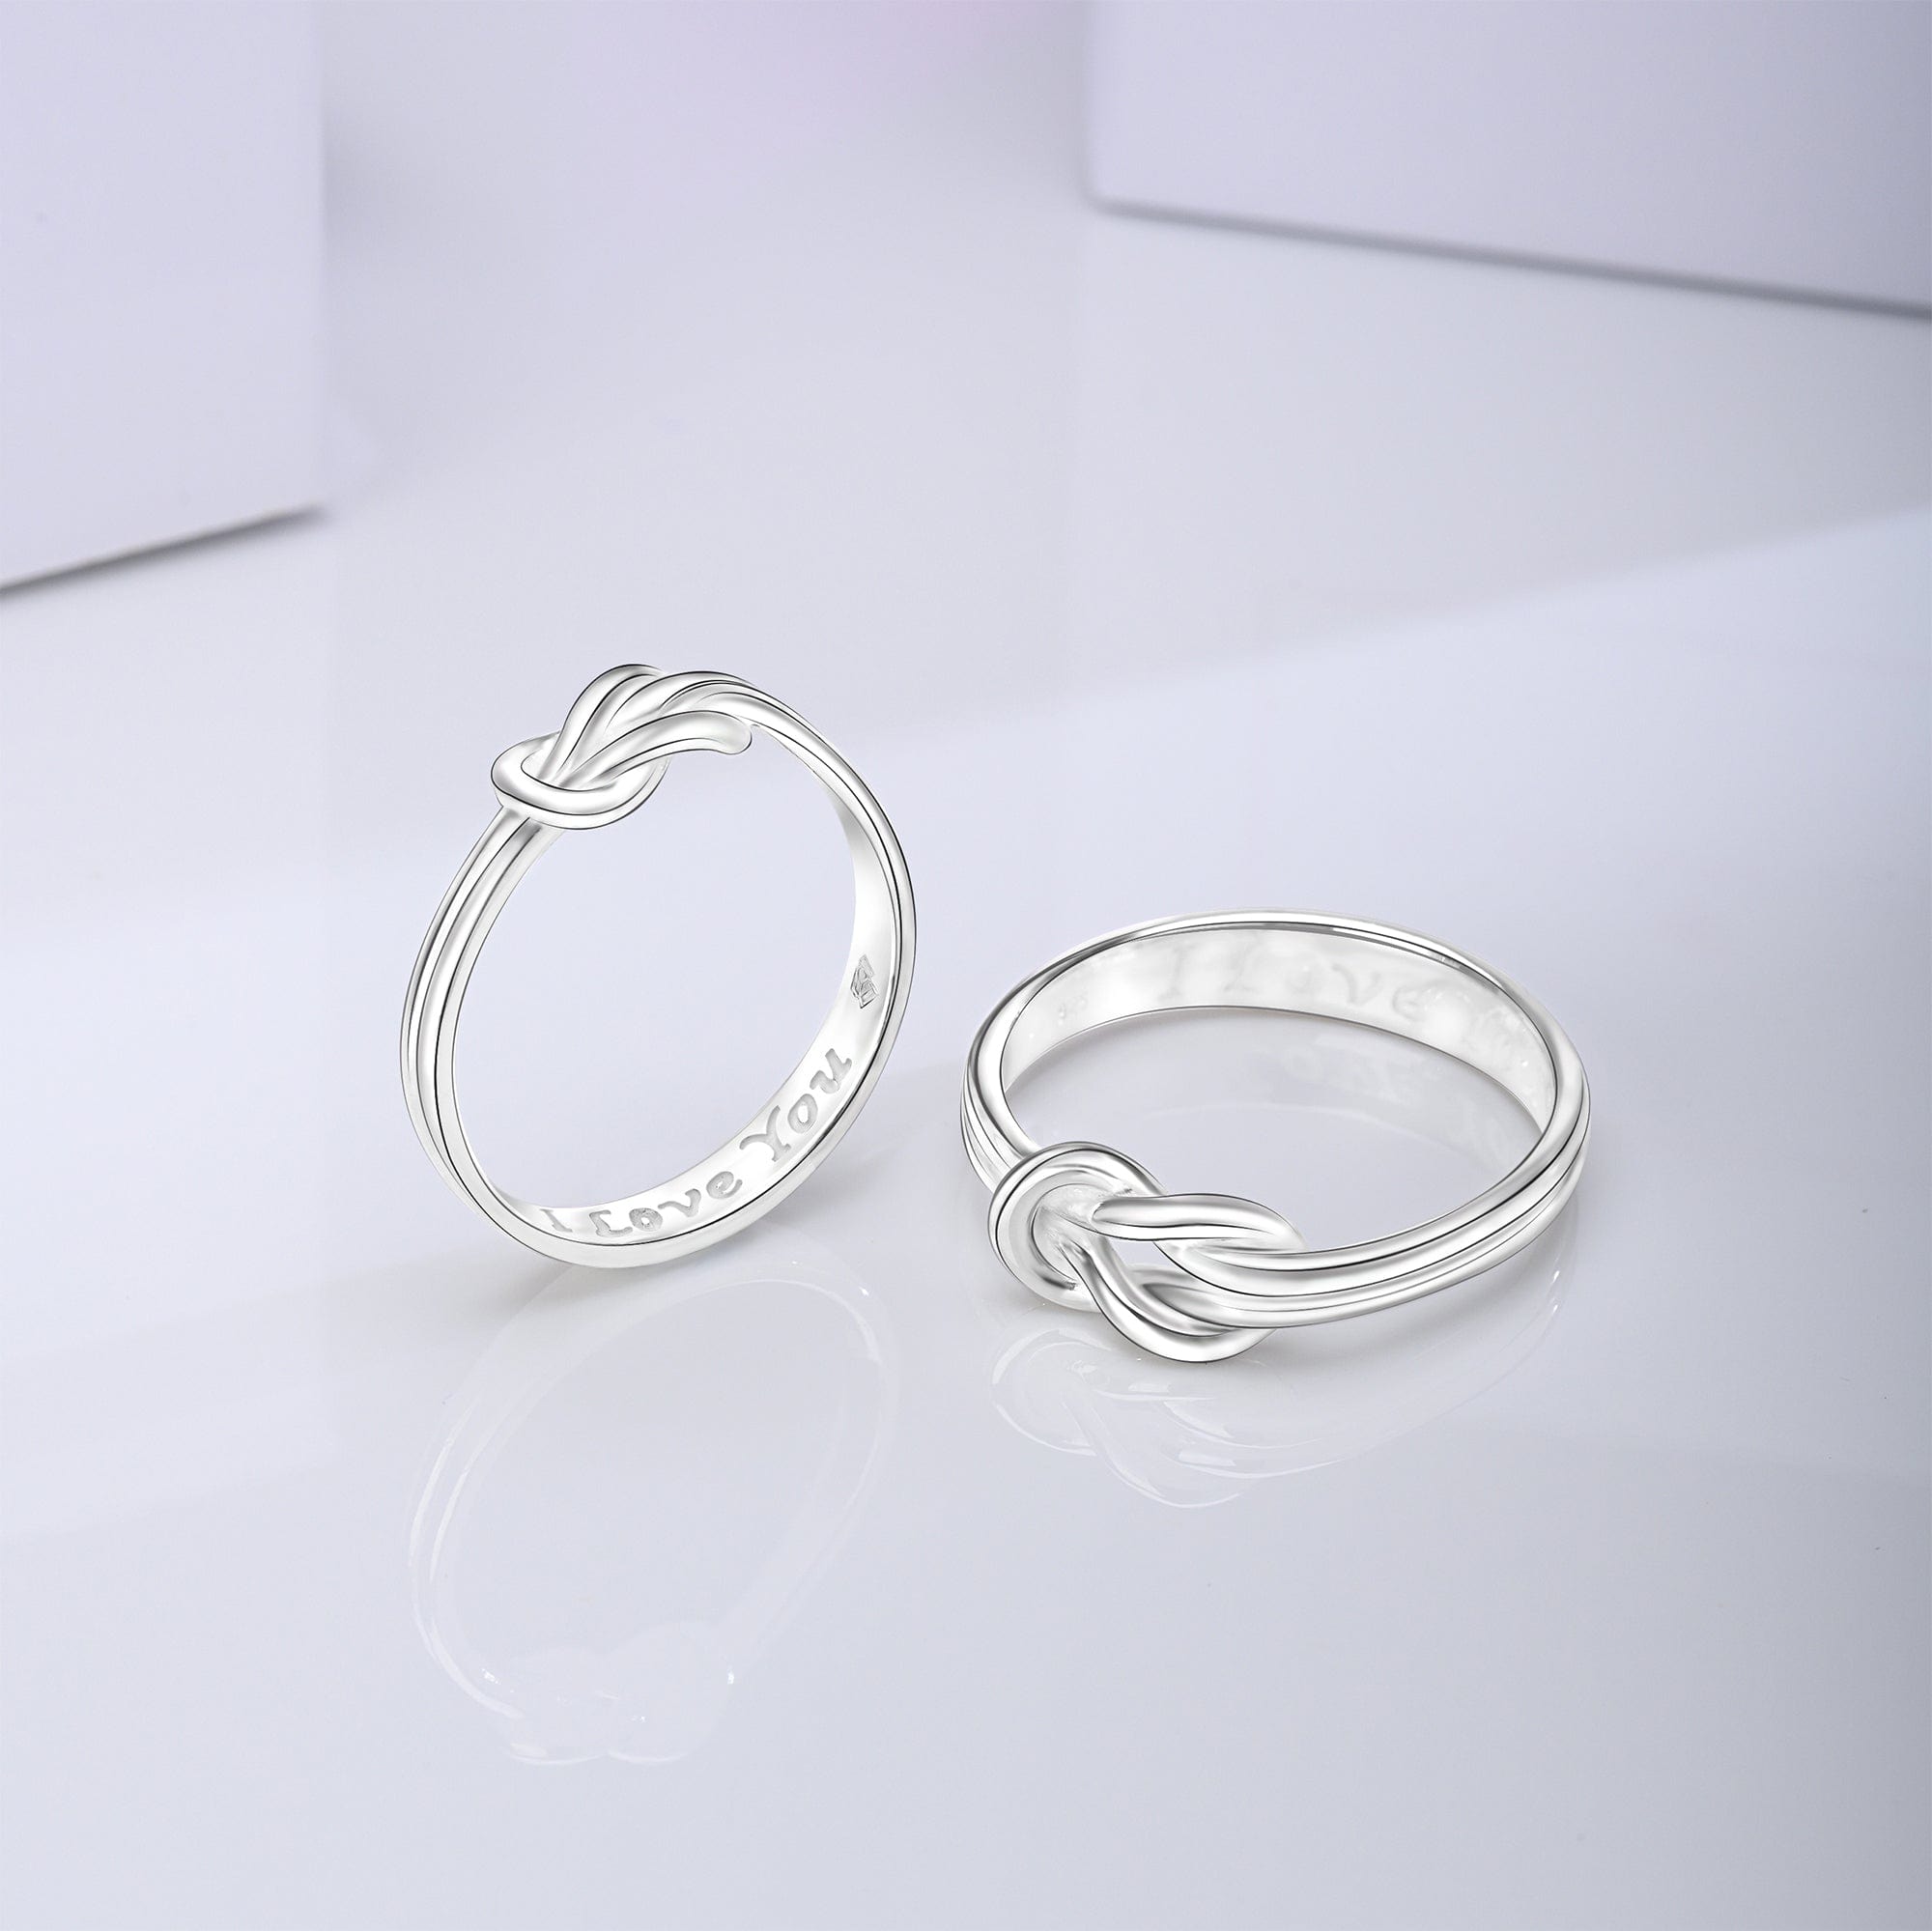 Braided Knot Silver Promise Rings for Couples Set M-US 8 / W- US 6 / Rhodium Plated